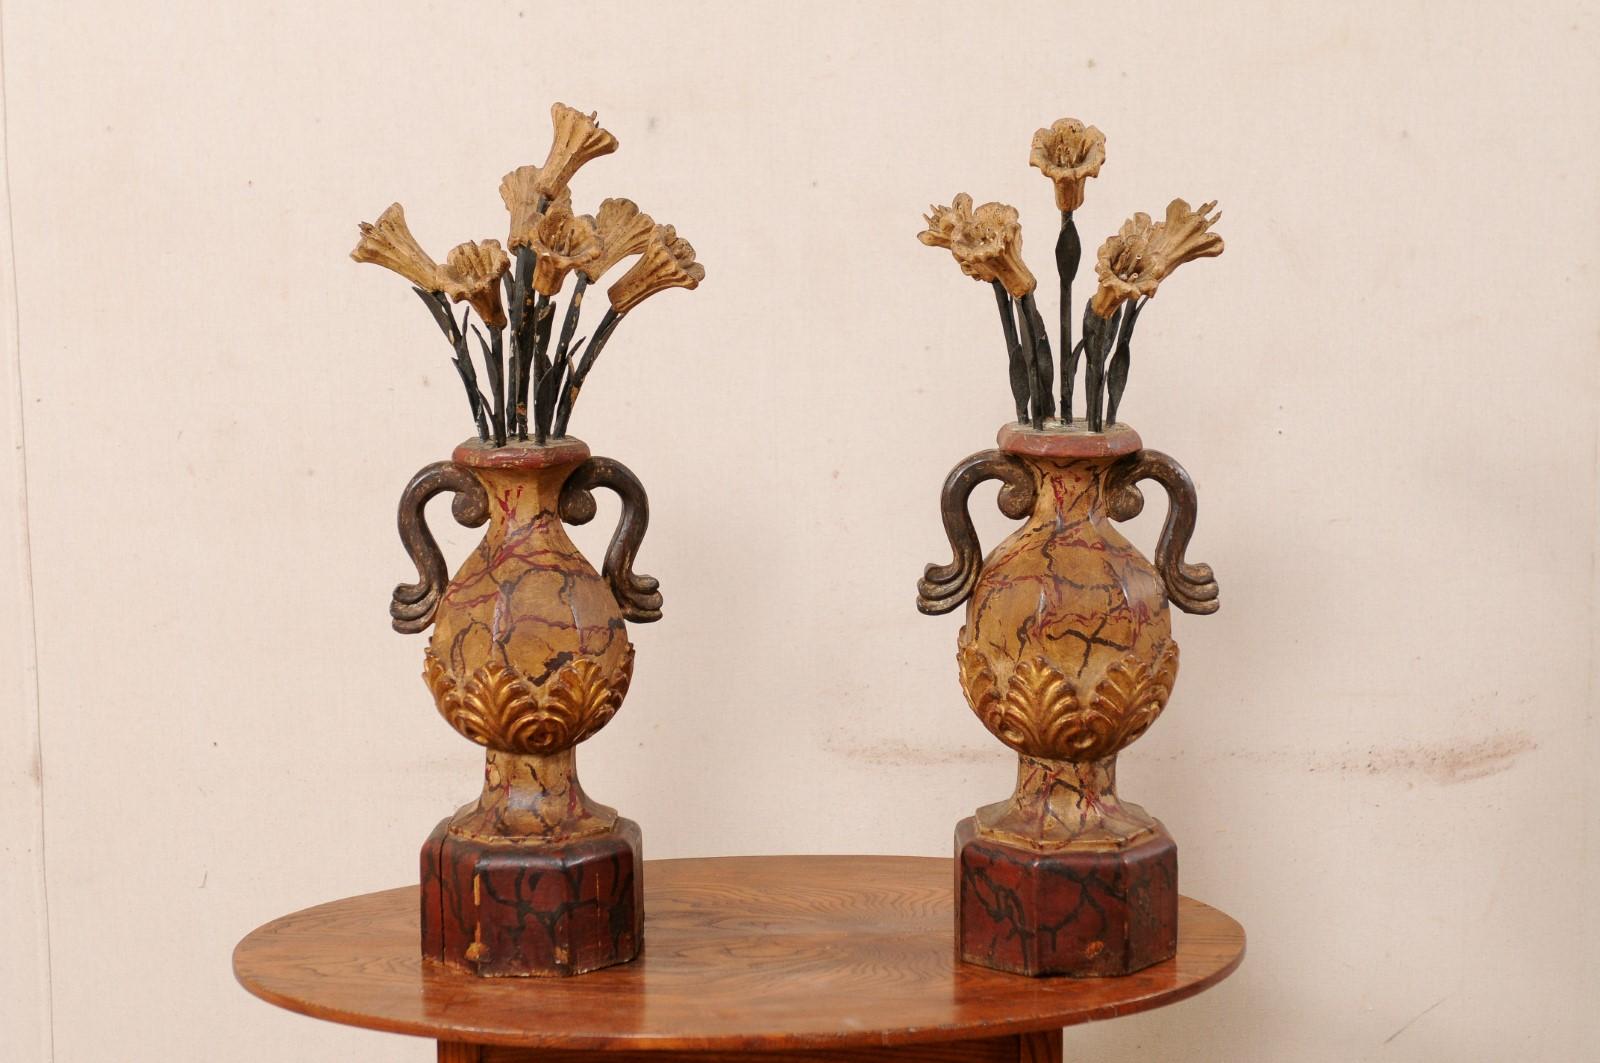 Pair of Italian Antique Carved-Wood Bouquet Urns with Polychrome Finish In Good Condition For Sale In Atlanta, GA